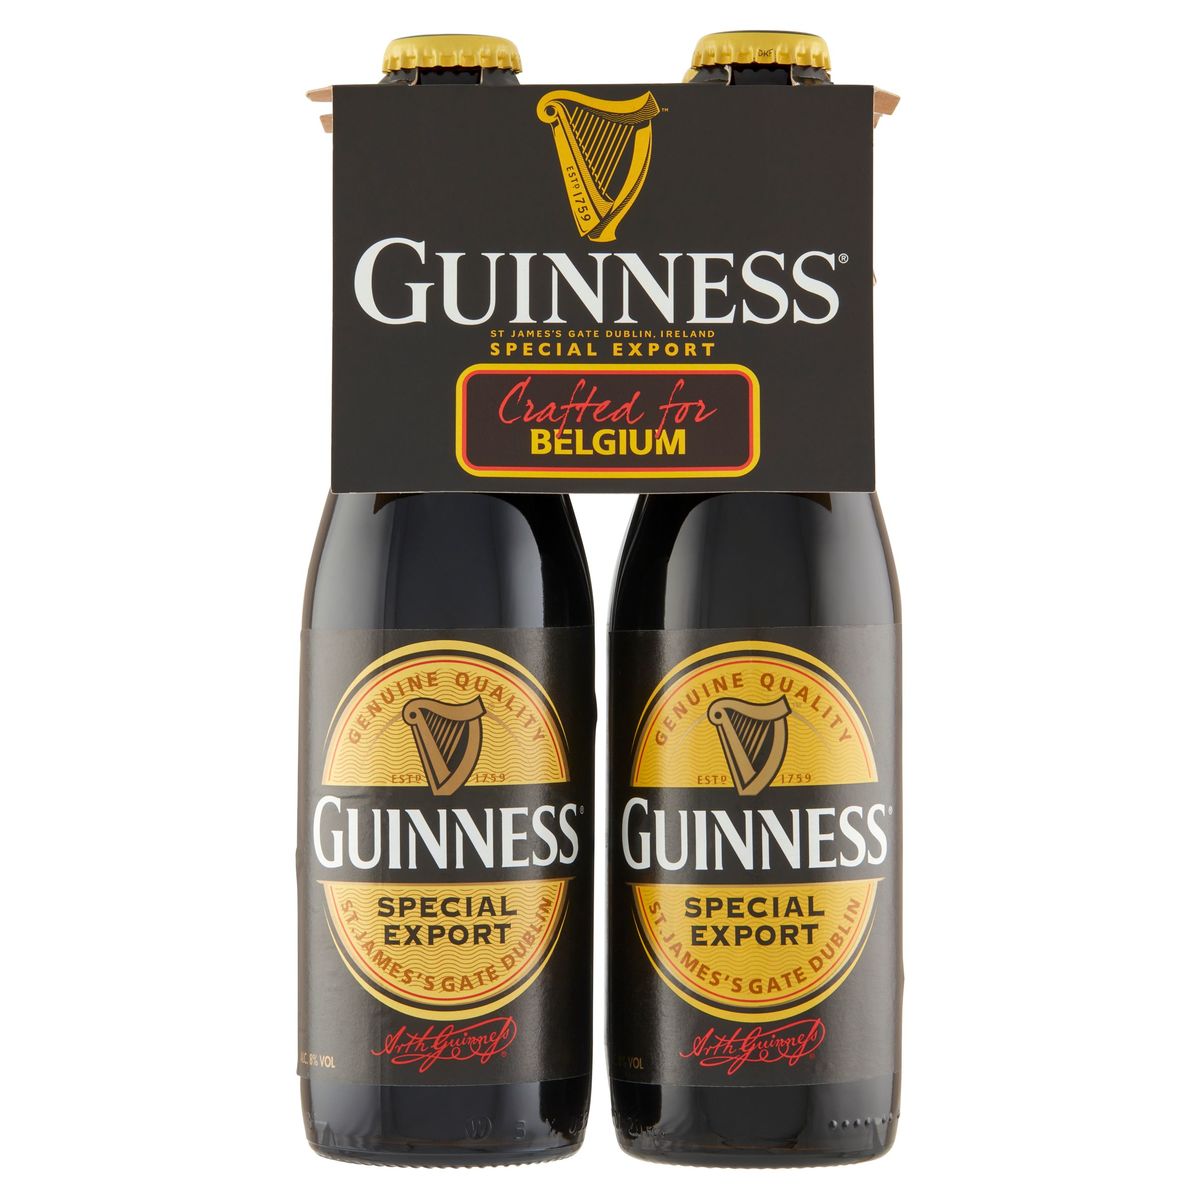 Guinness Special Export Bouteilles 4 x 33 cl